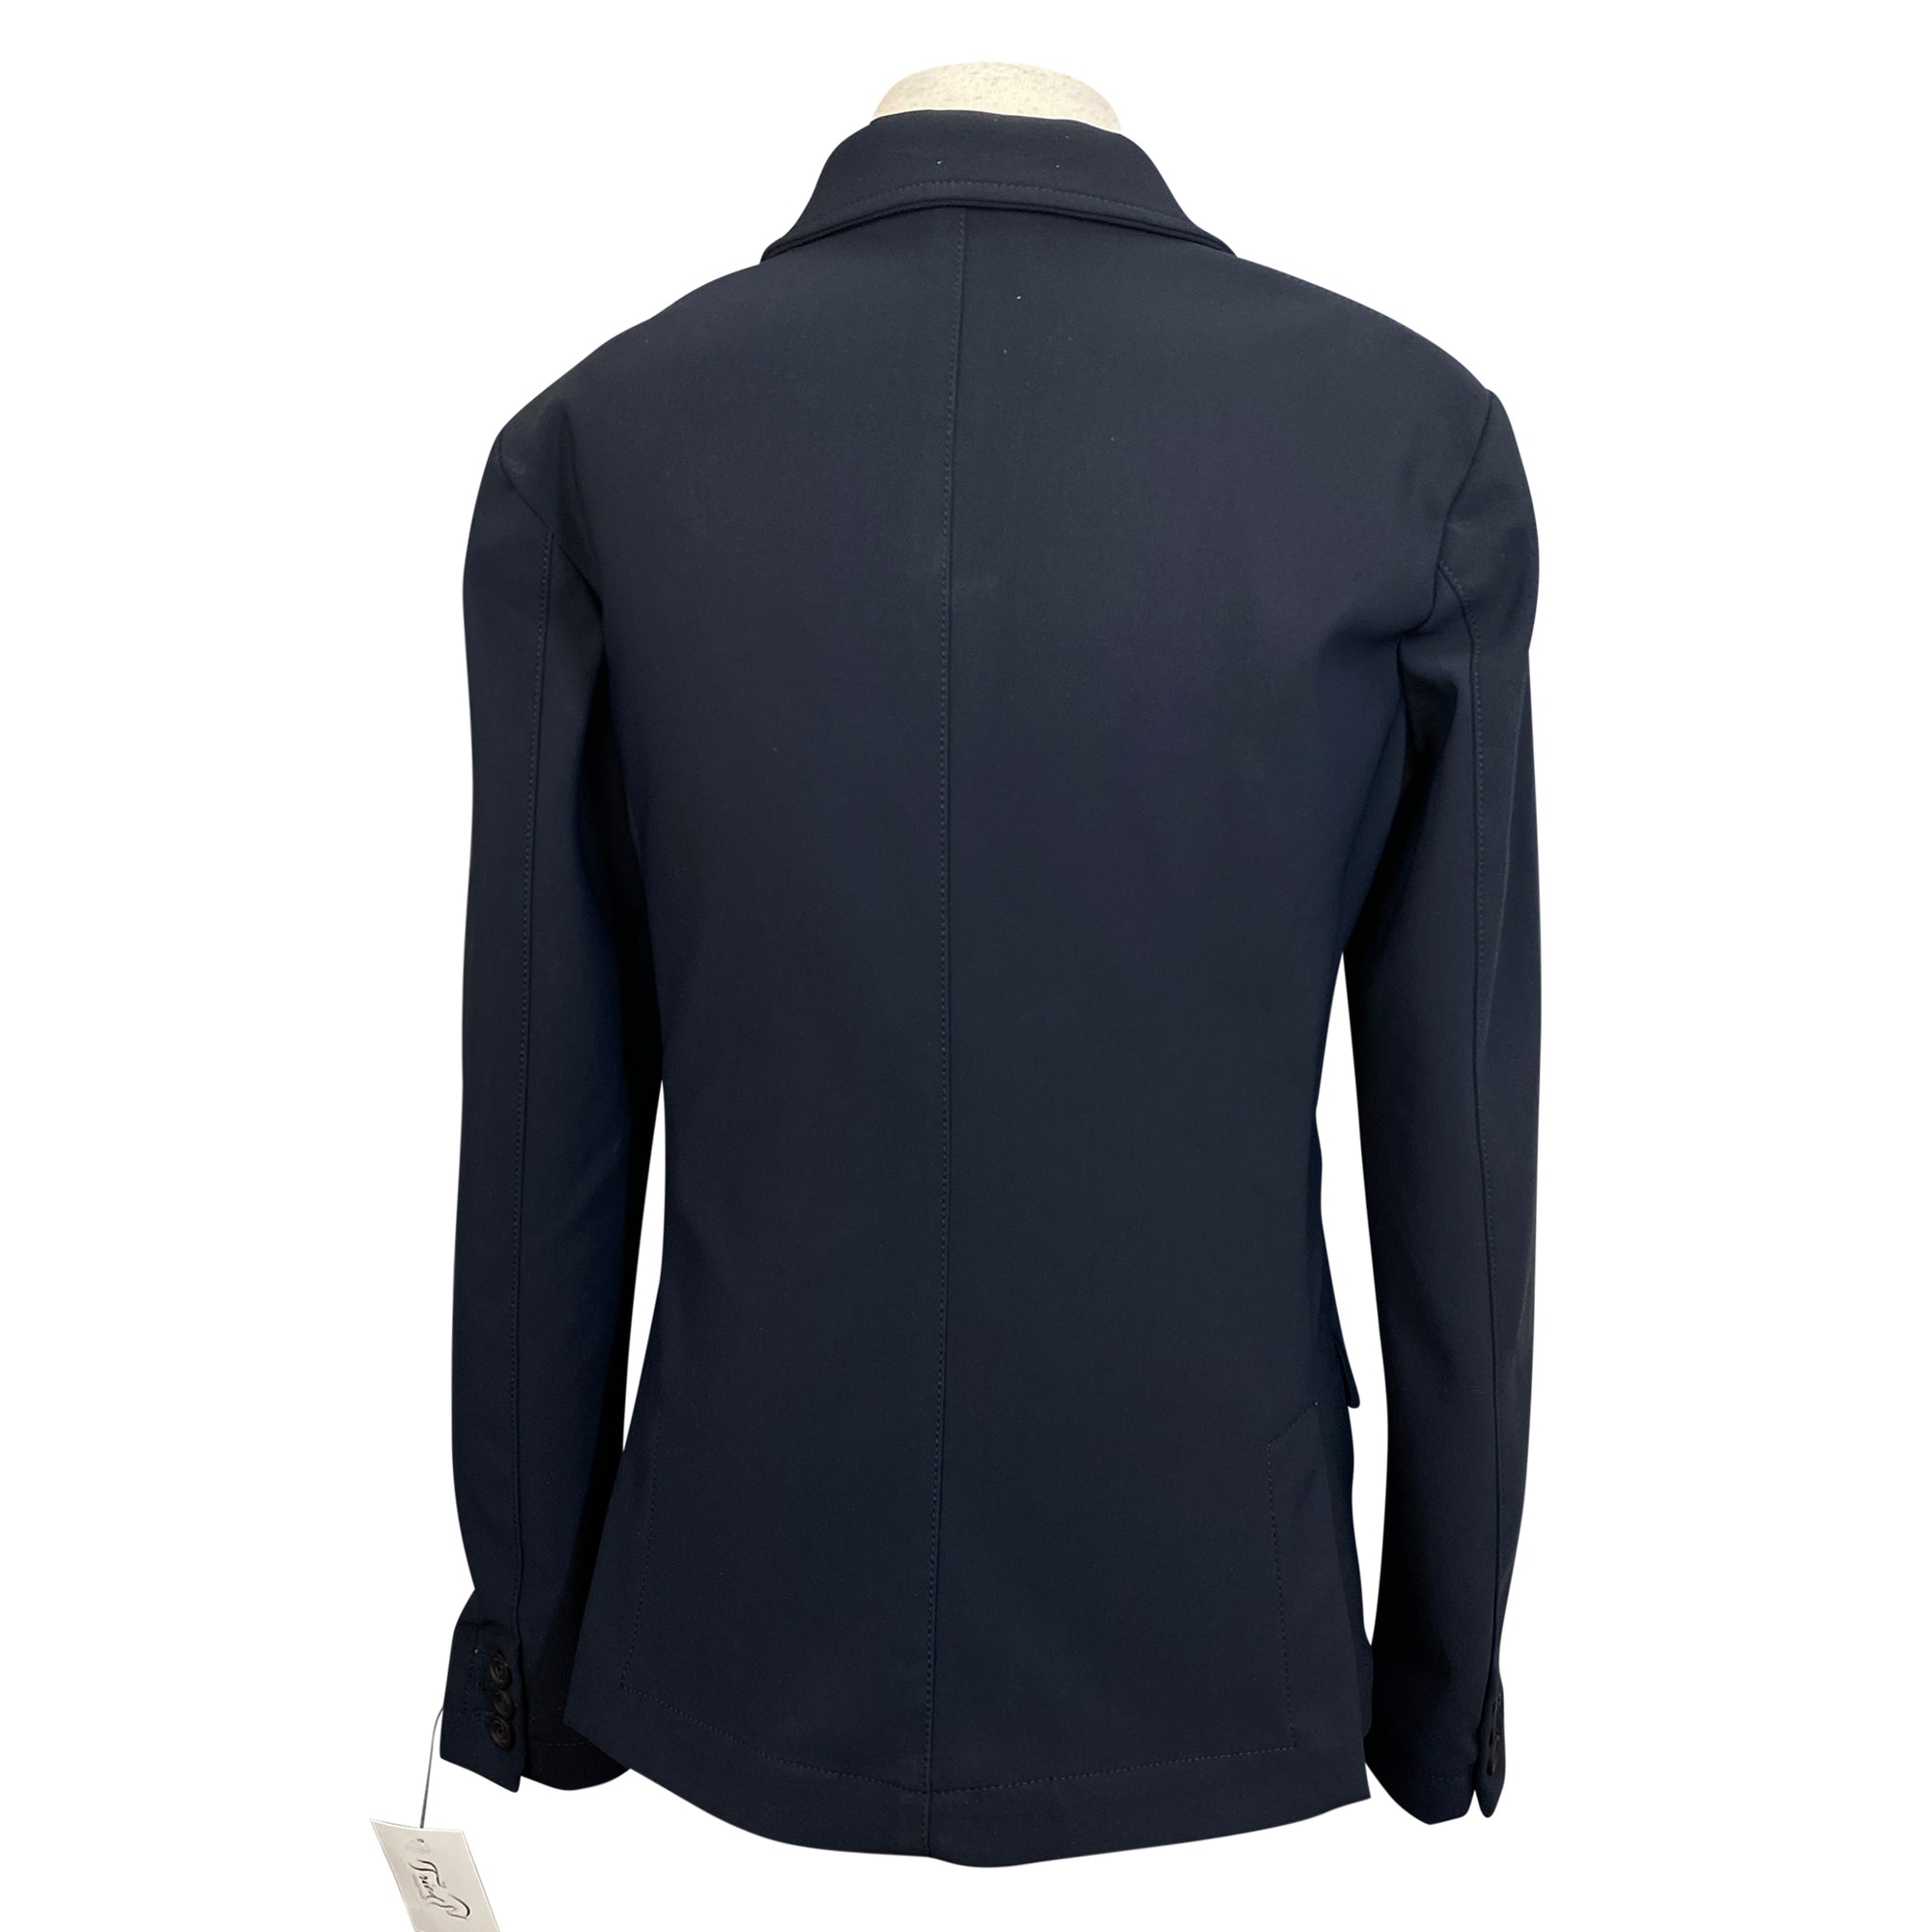 Cavalleria Toscana Competition Jacket in Navy